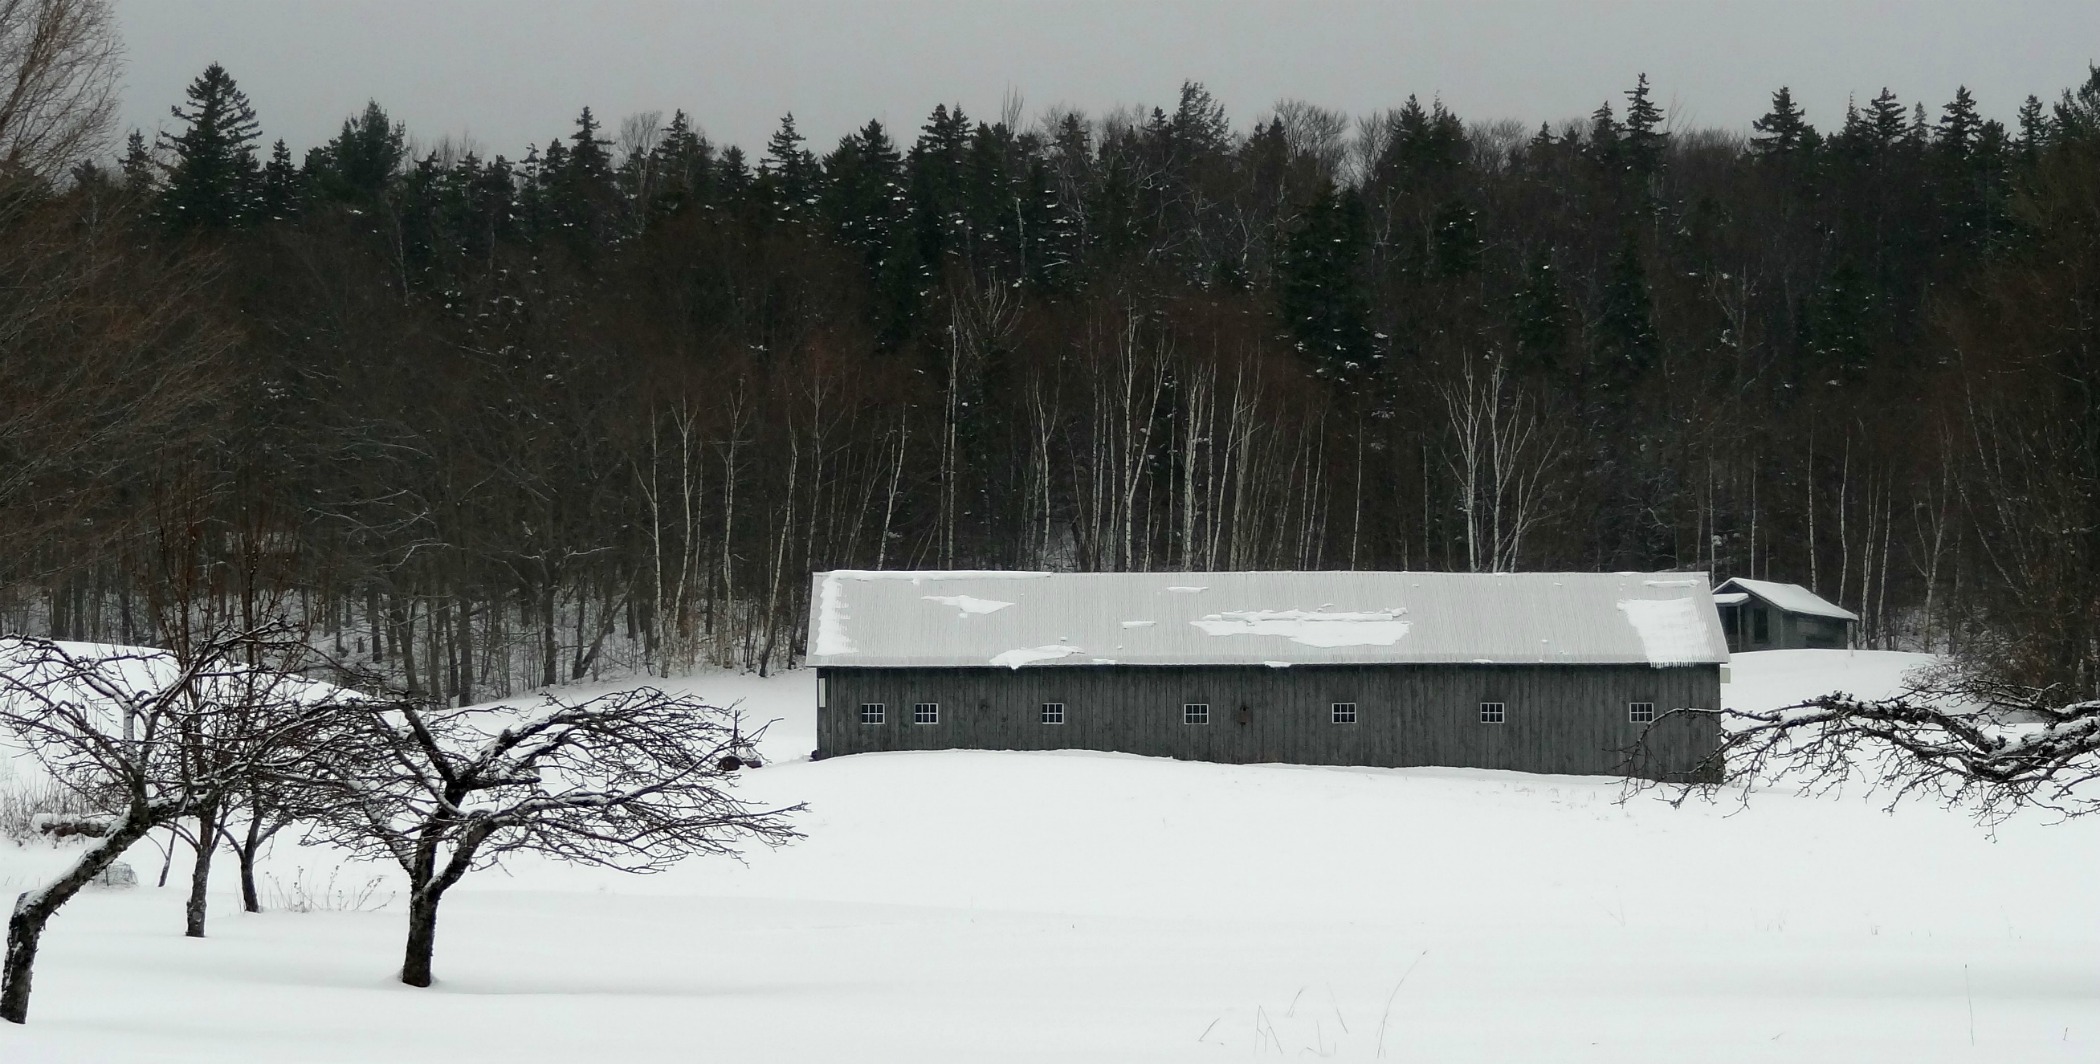 Barn, Wonalancet, Nh (user submitted)